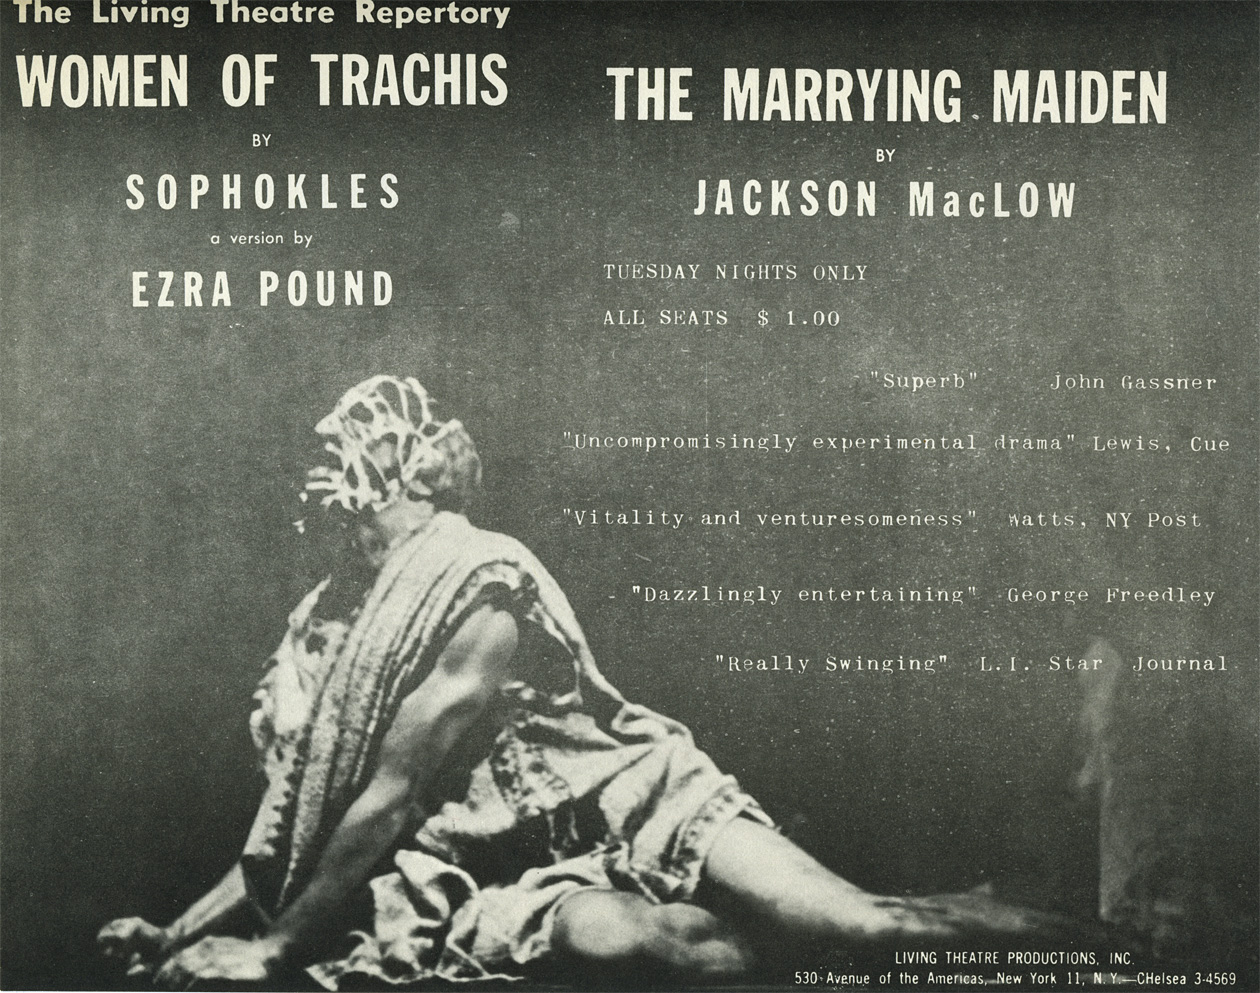 The Living Theatre presents Women of Trachis by Sophocles, a version by Ezra Pound and The Marrying Maiden by Jackson MacLow, Tuesdays, 1960.  9 x 7 inches. 